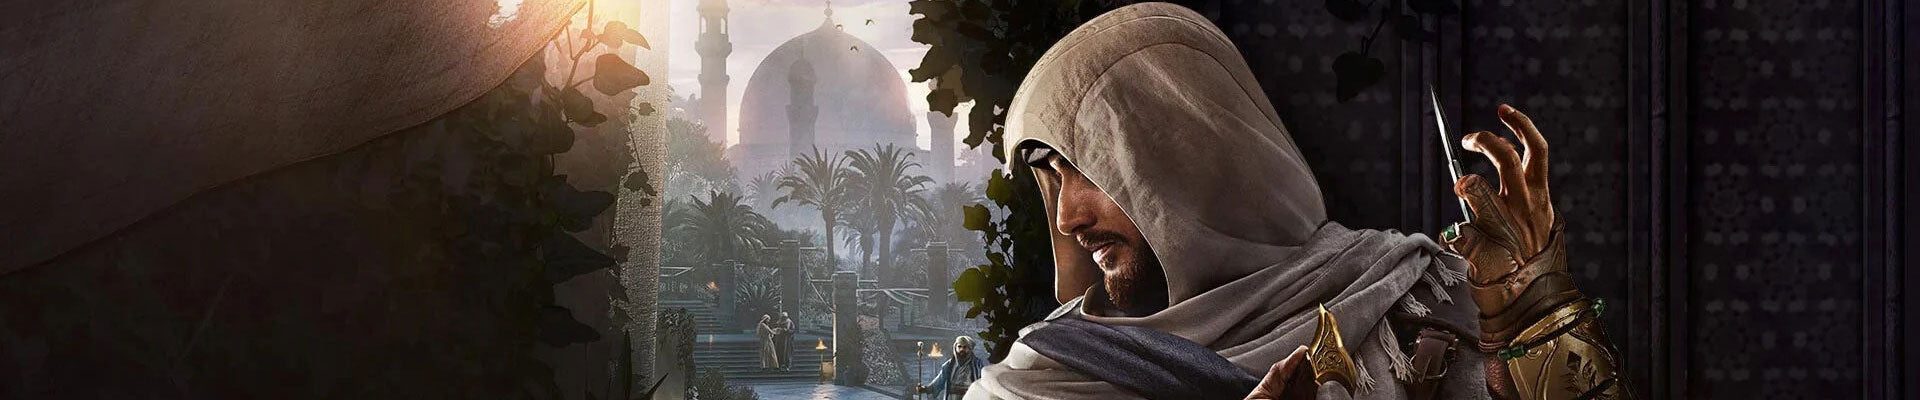 Assassin's Creed Mirage Art Category